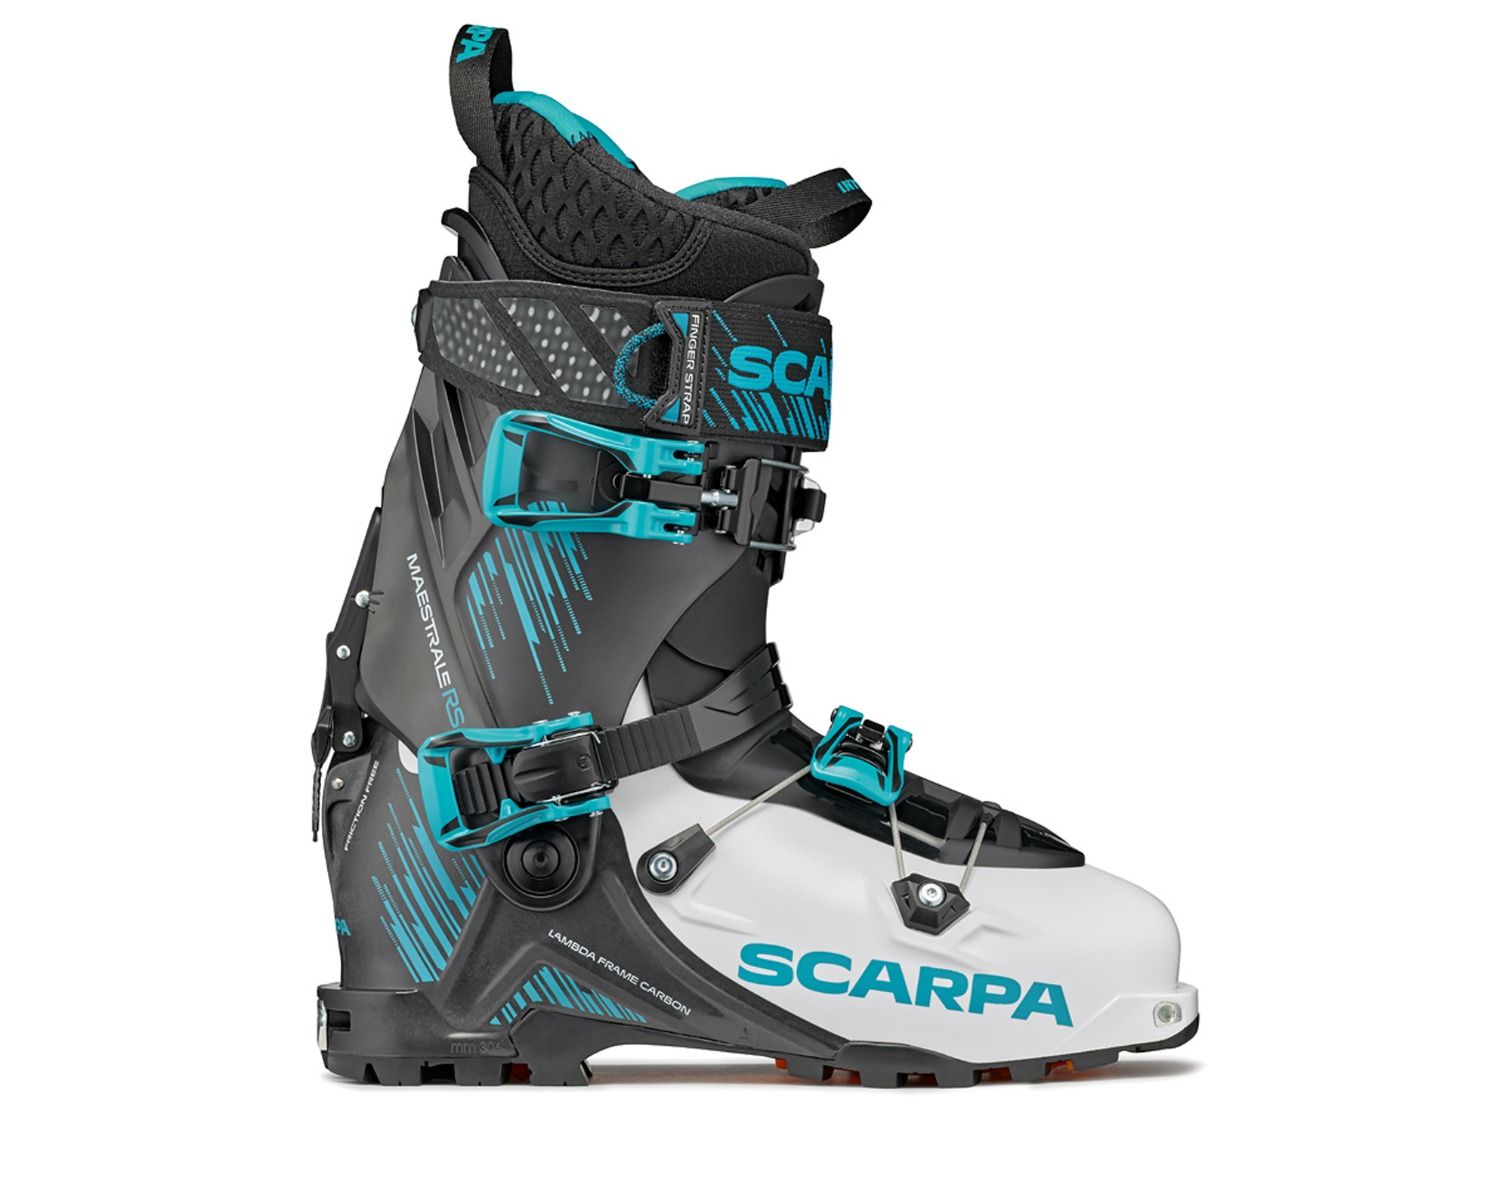 white and black three buckle, 2 piece ski touring boots, Scarpa maestrale 2022